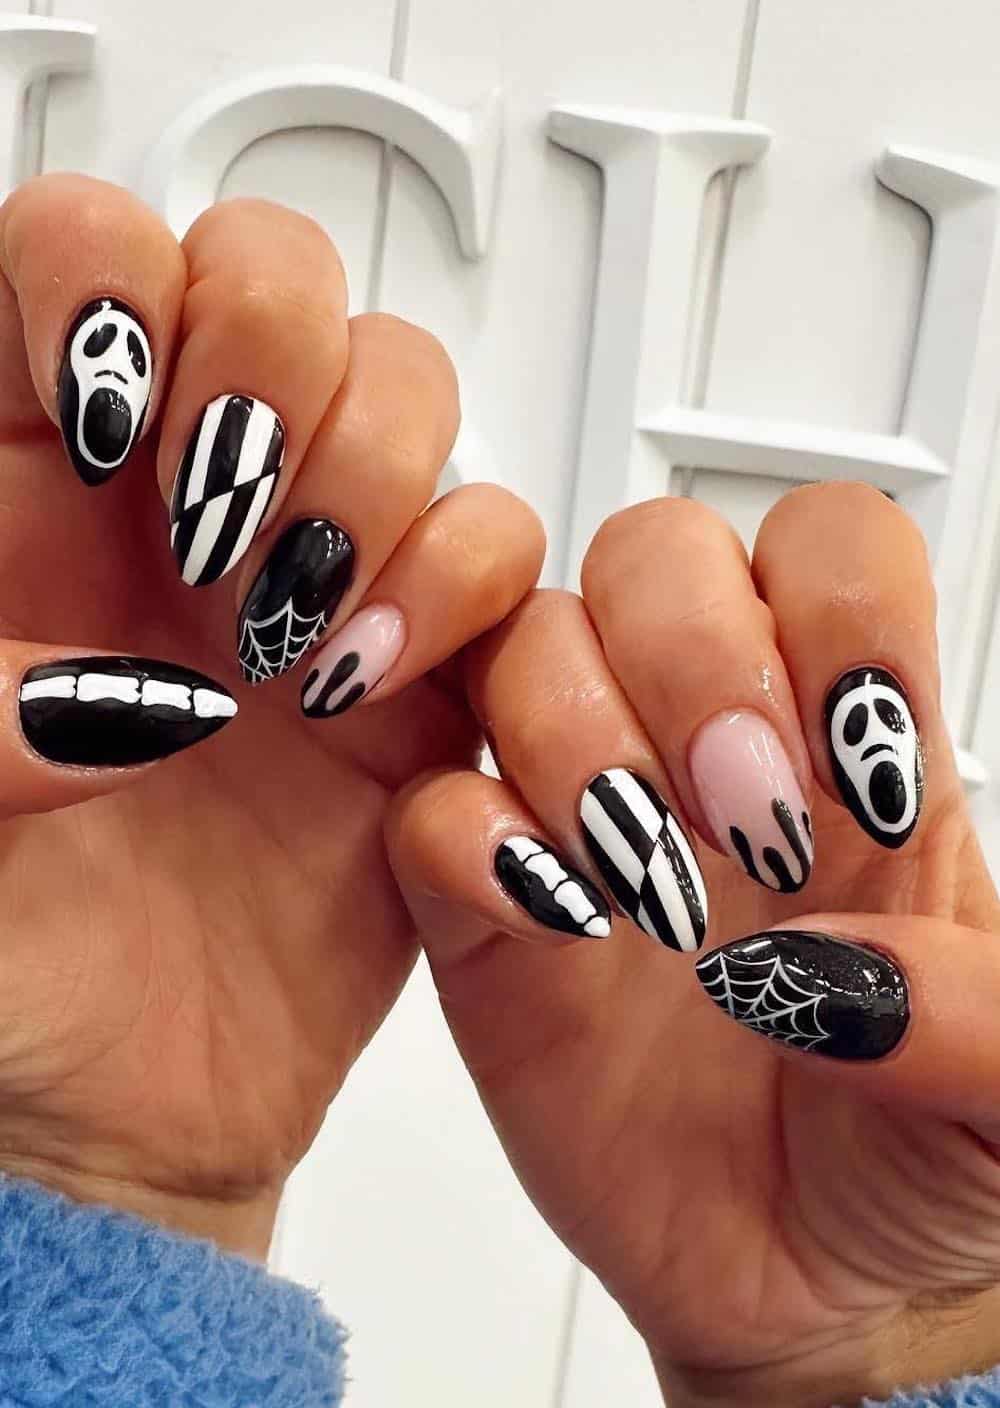 long black and white nails with Halloween nail art like Ghostface, spider webs, and bones